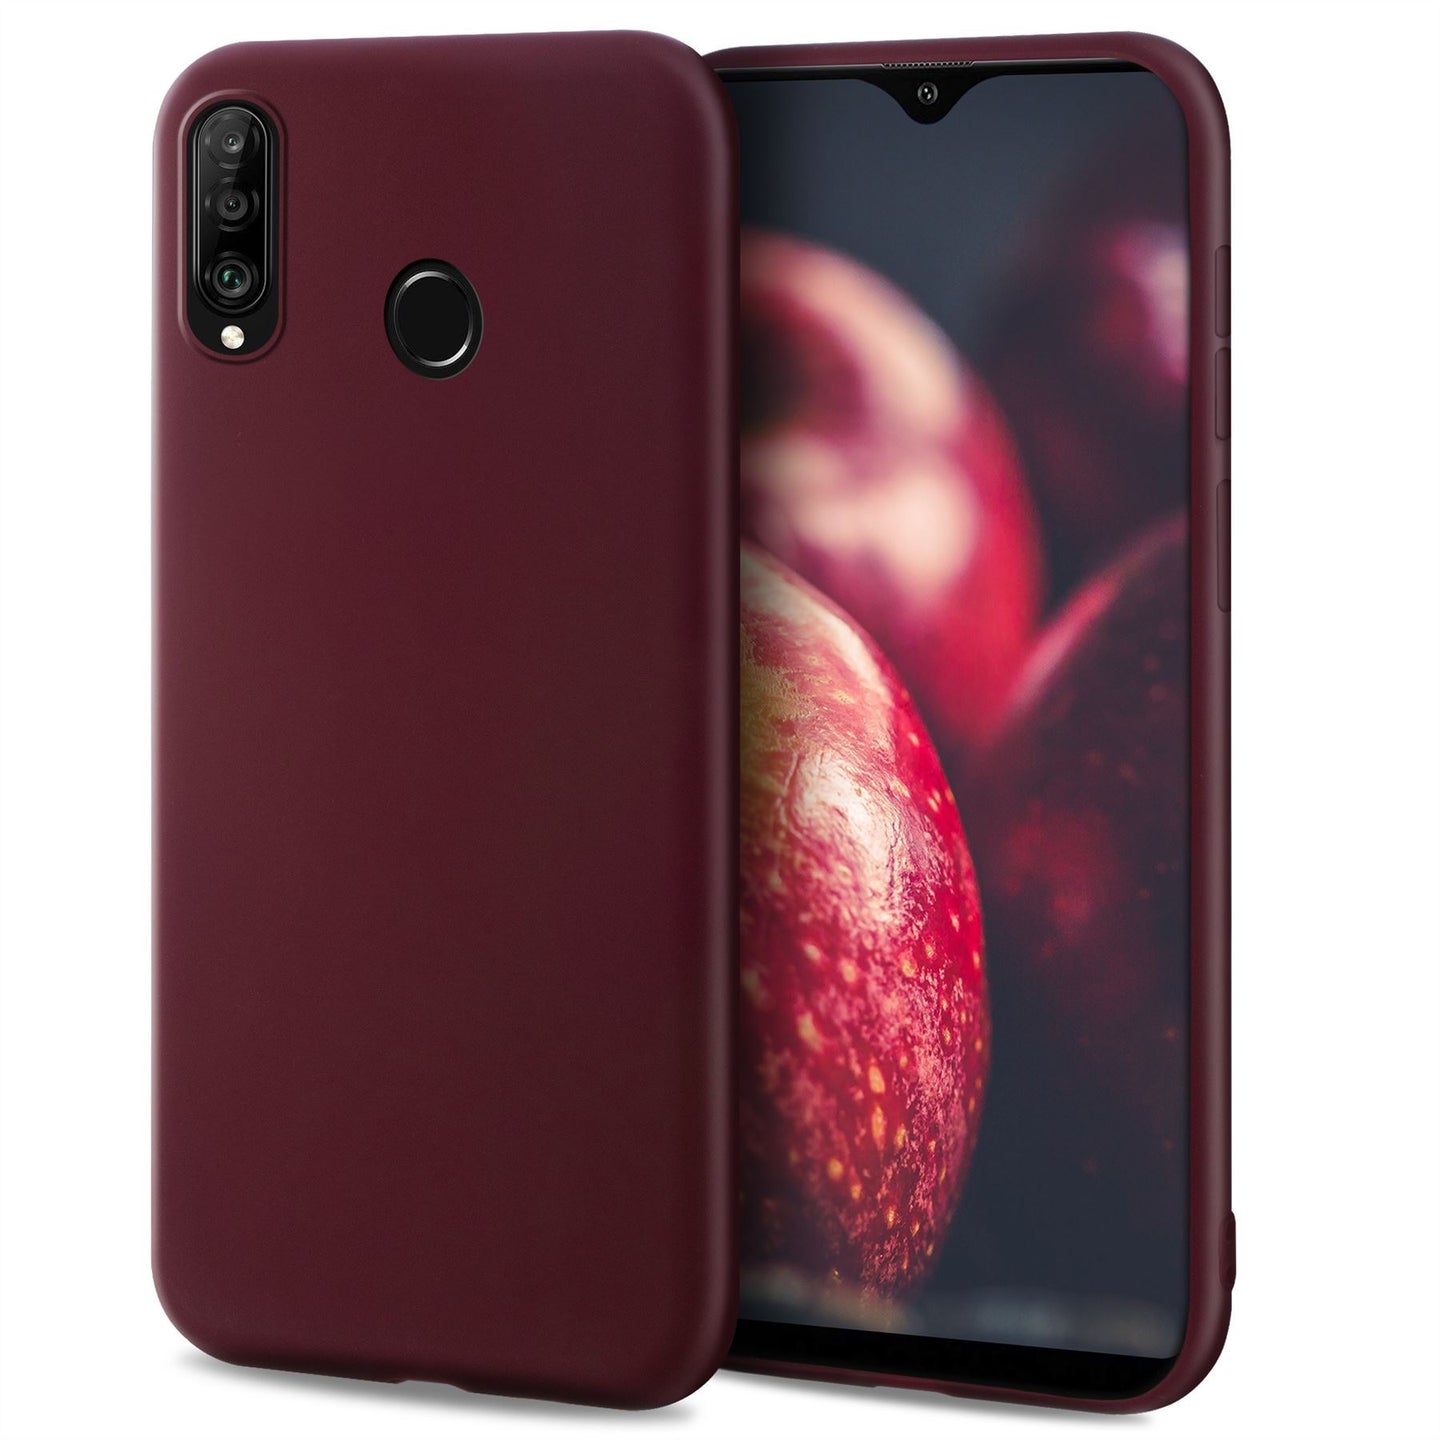 Moozy Minimalist Series Silicone Case for Huawei P30 Lite, Wine Red - Matte Finish Slim Soft TPU Cover